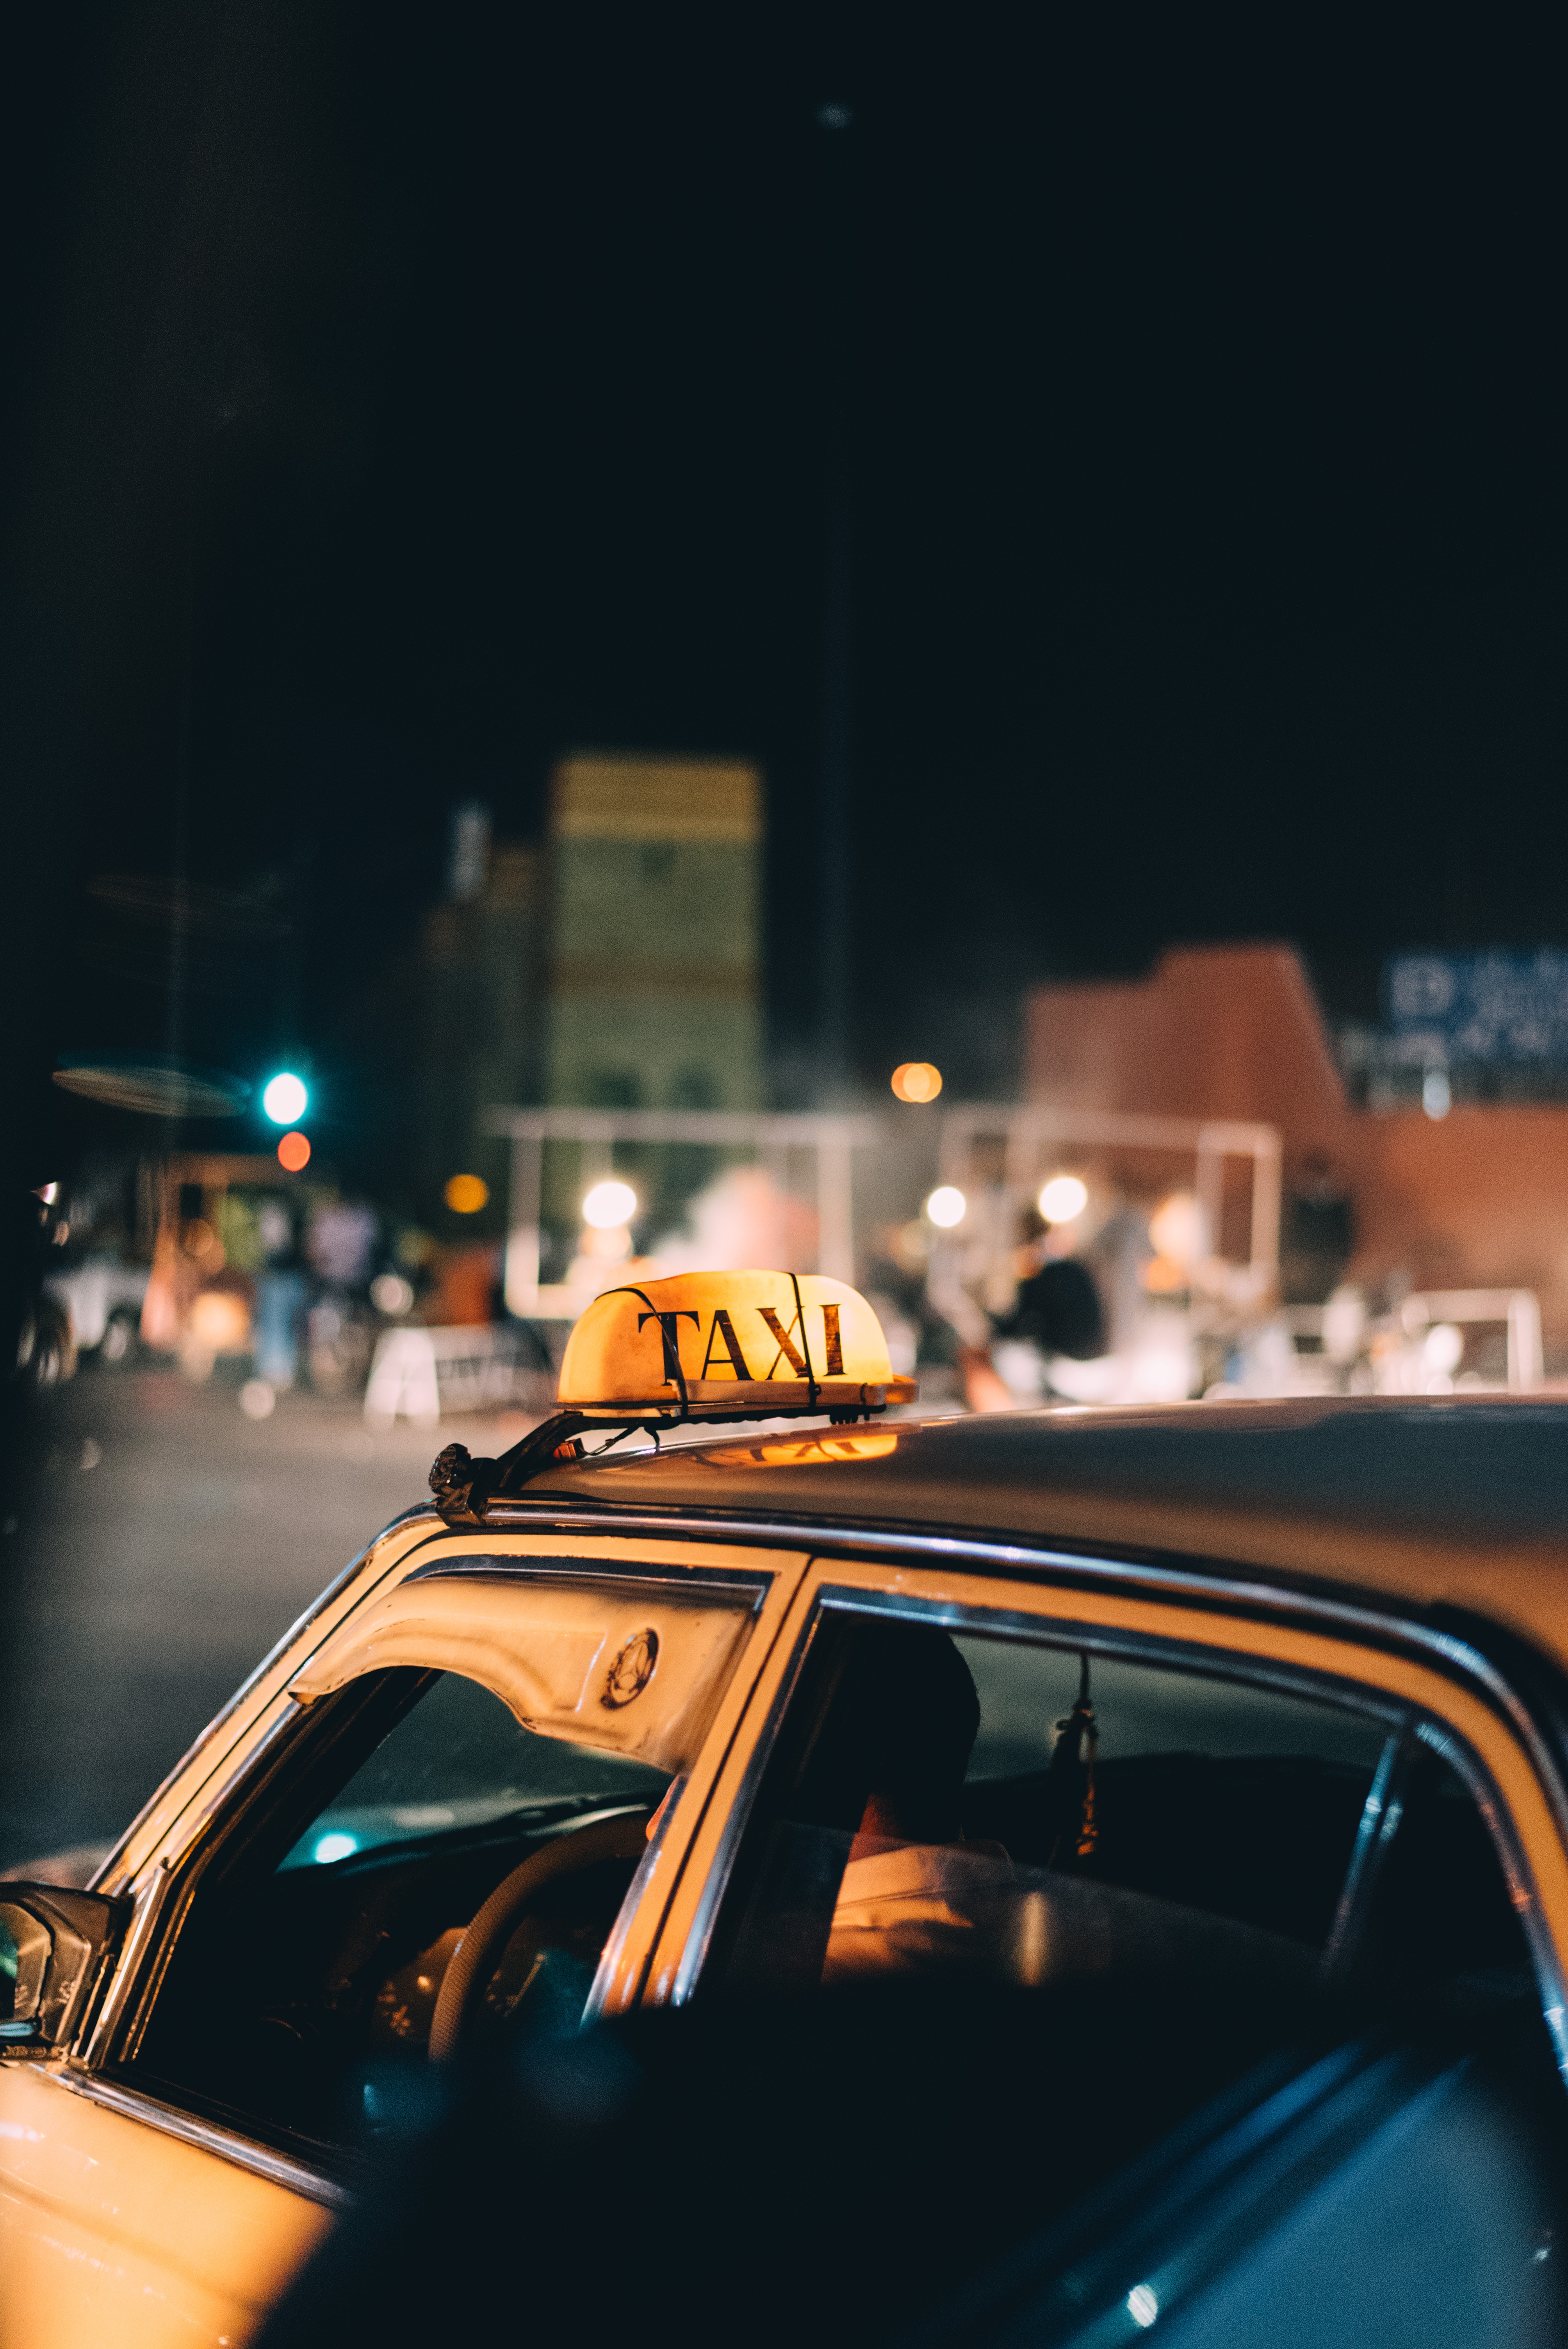 HQ Taxi Background